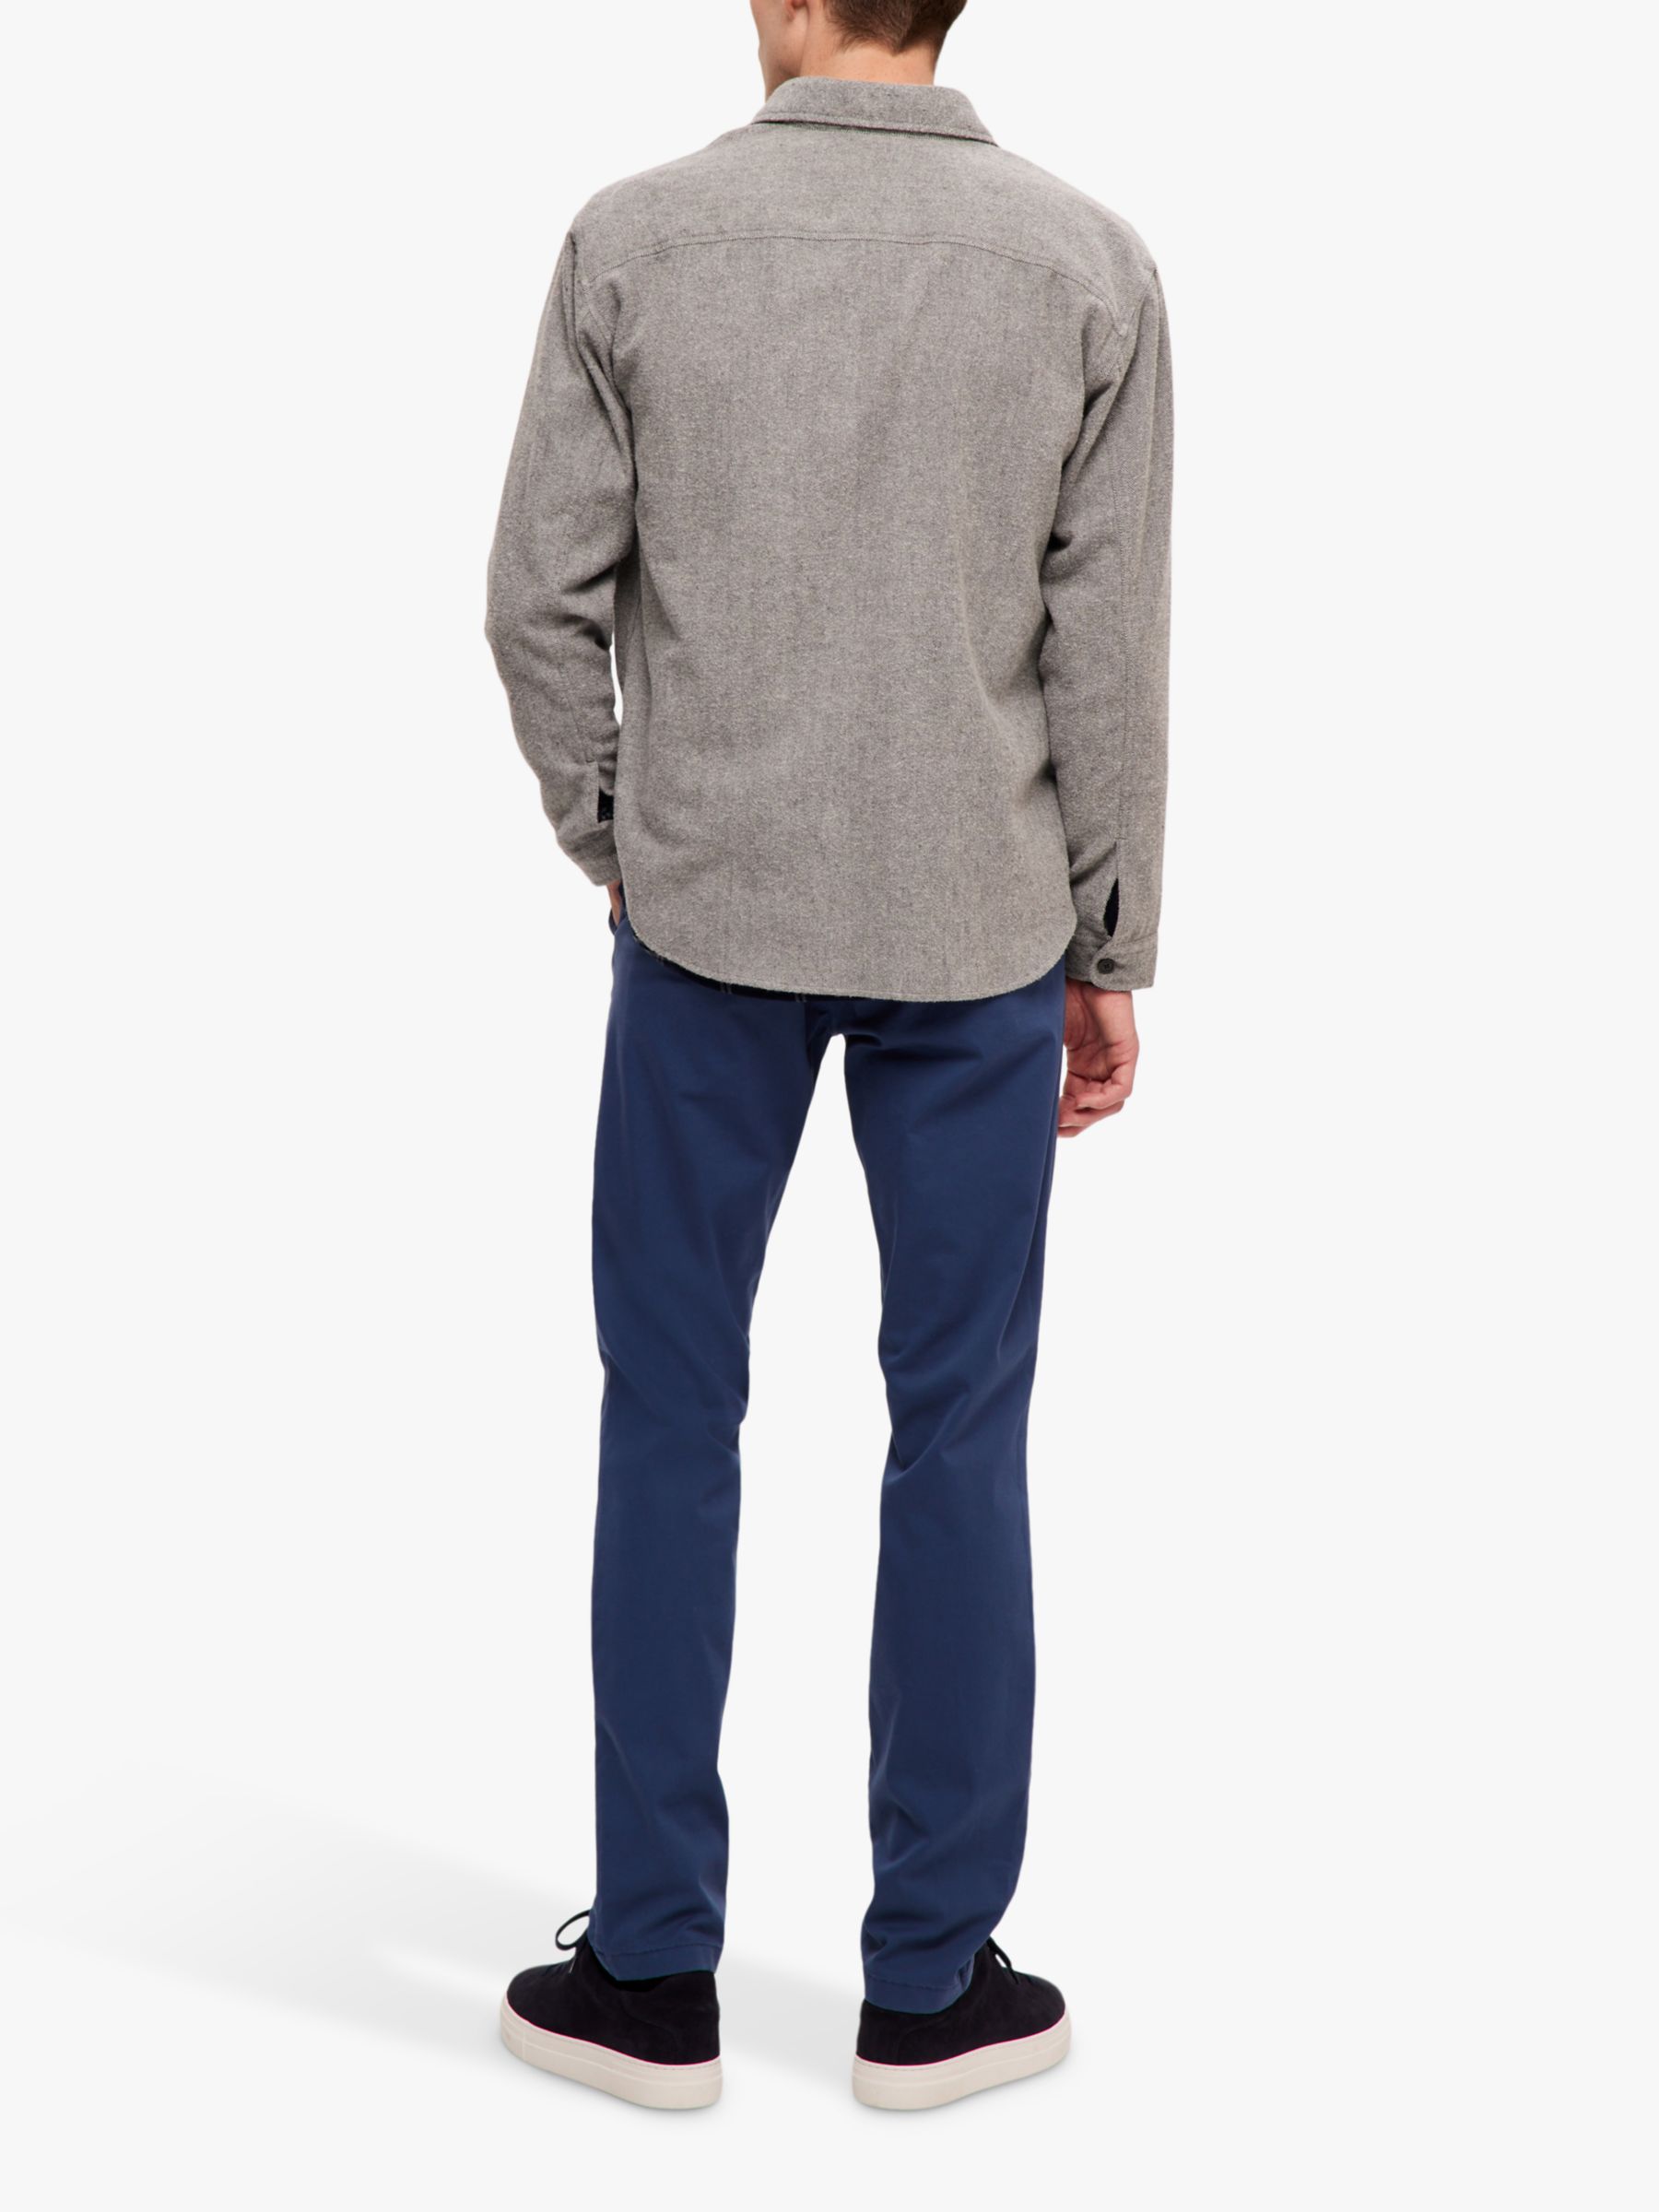 Buy SELECTED HOMME Mason Twill Overshirt, Grey Online at johnlewis.com